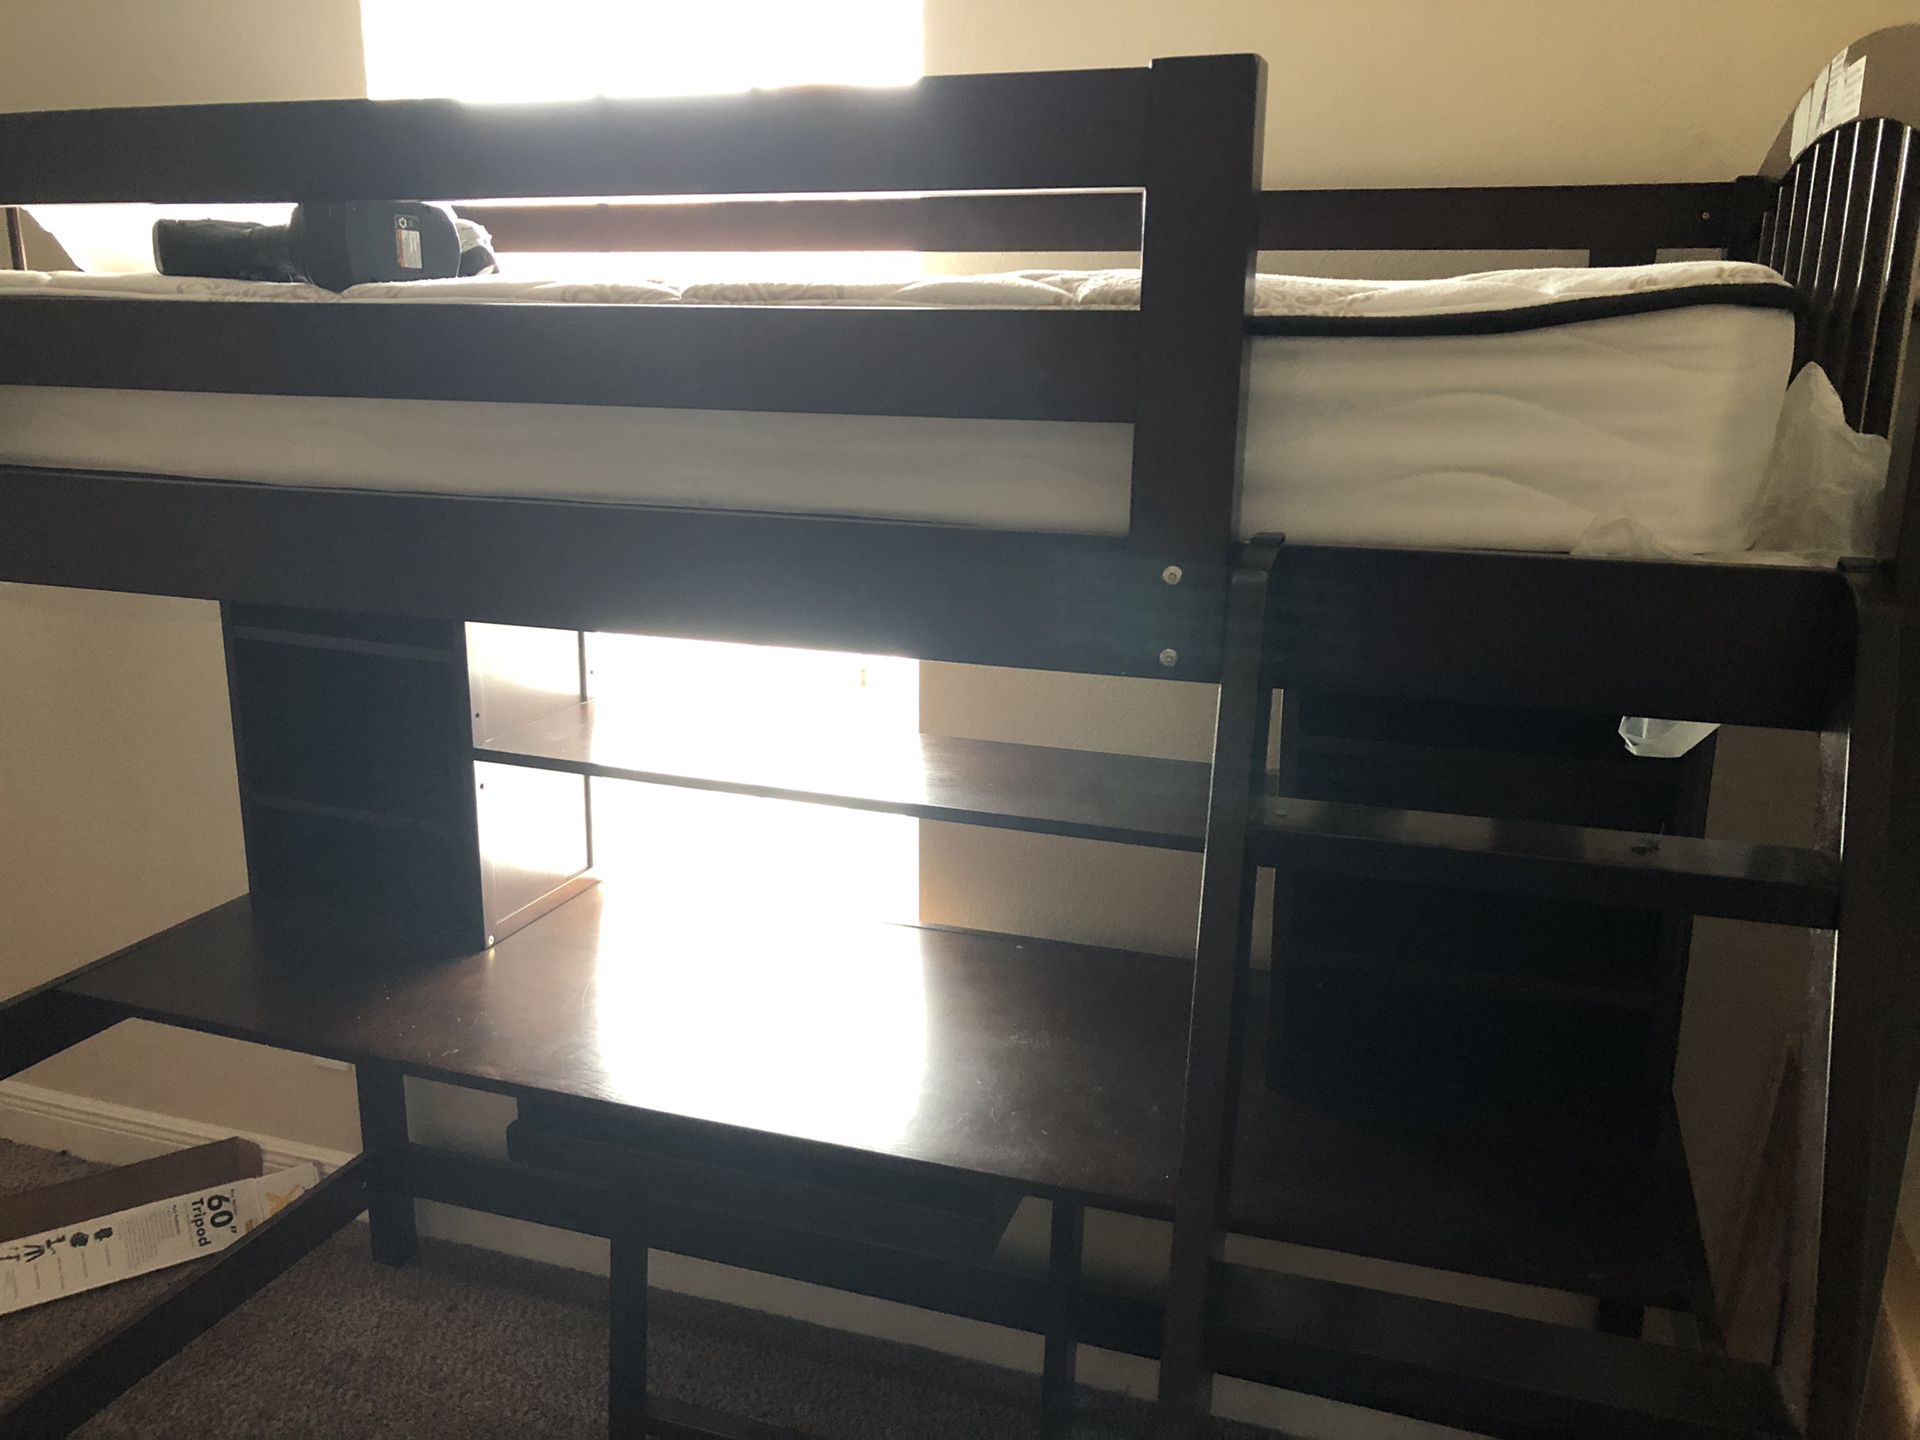 Kids loft bed with desk and bookshelves underneath. Cherry wood, will hold up to 175 lbs. Excellent condition! Must pickup.